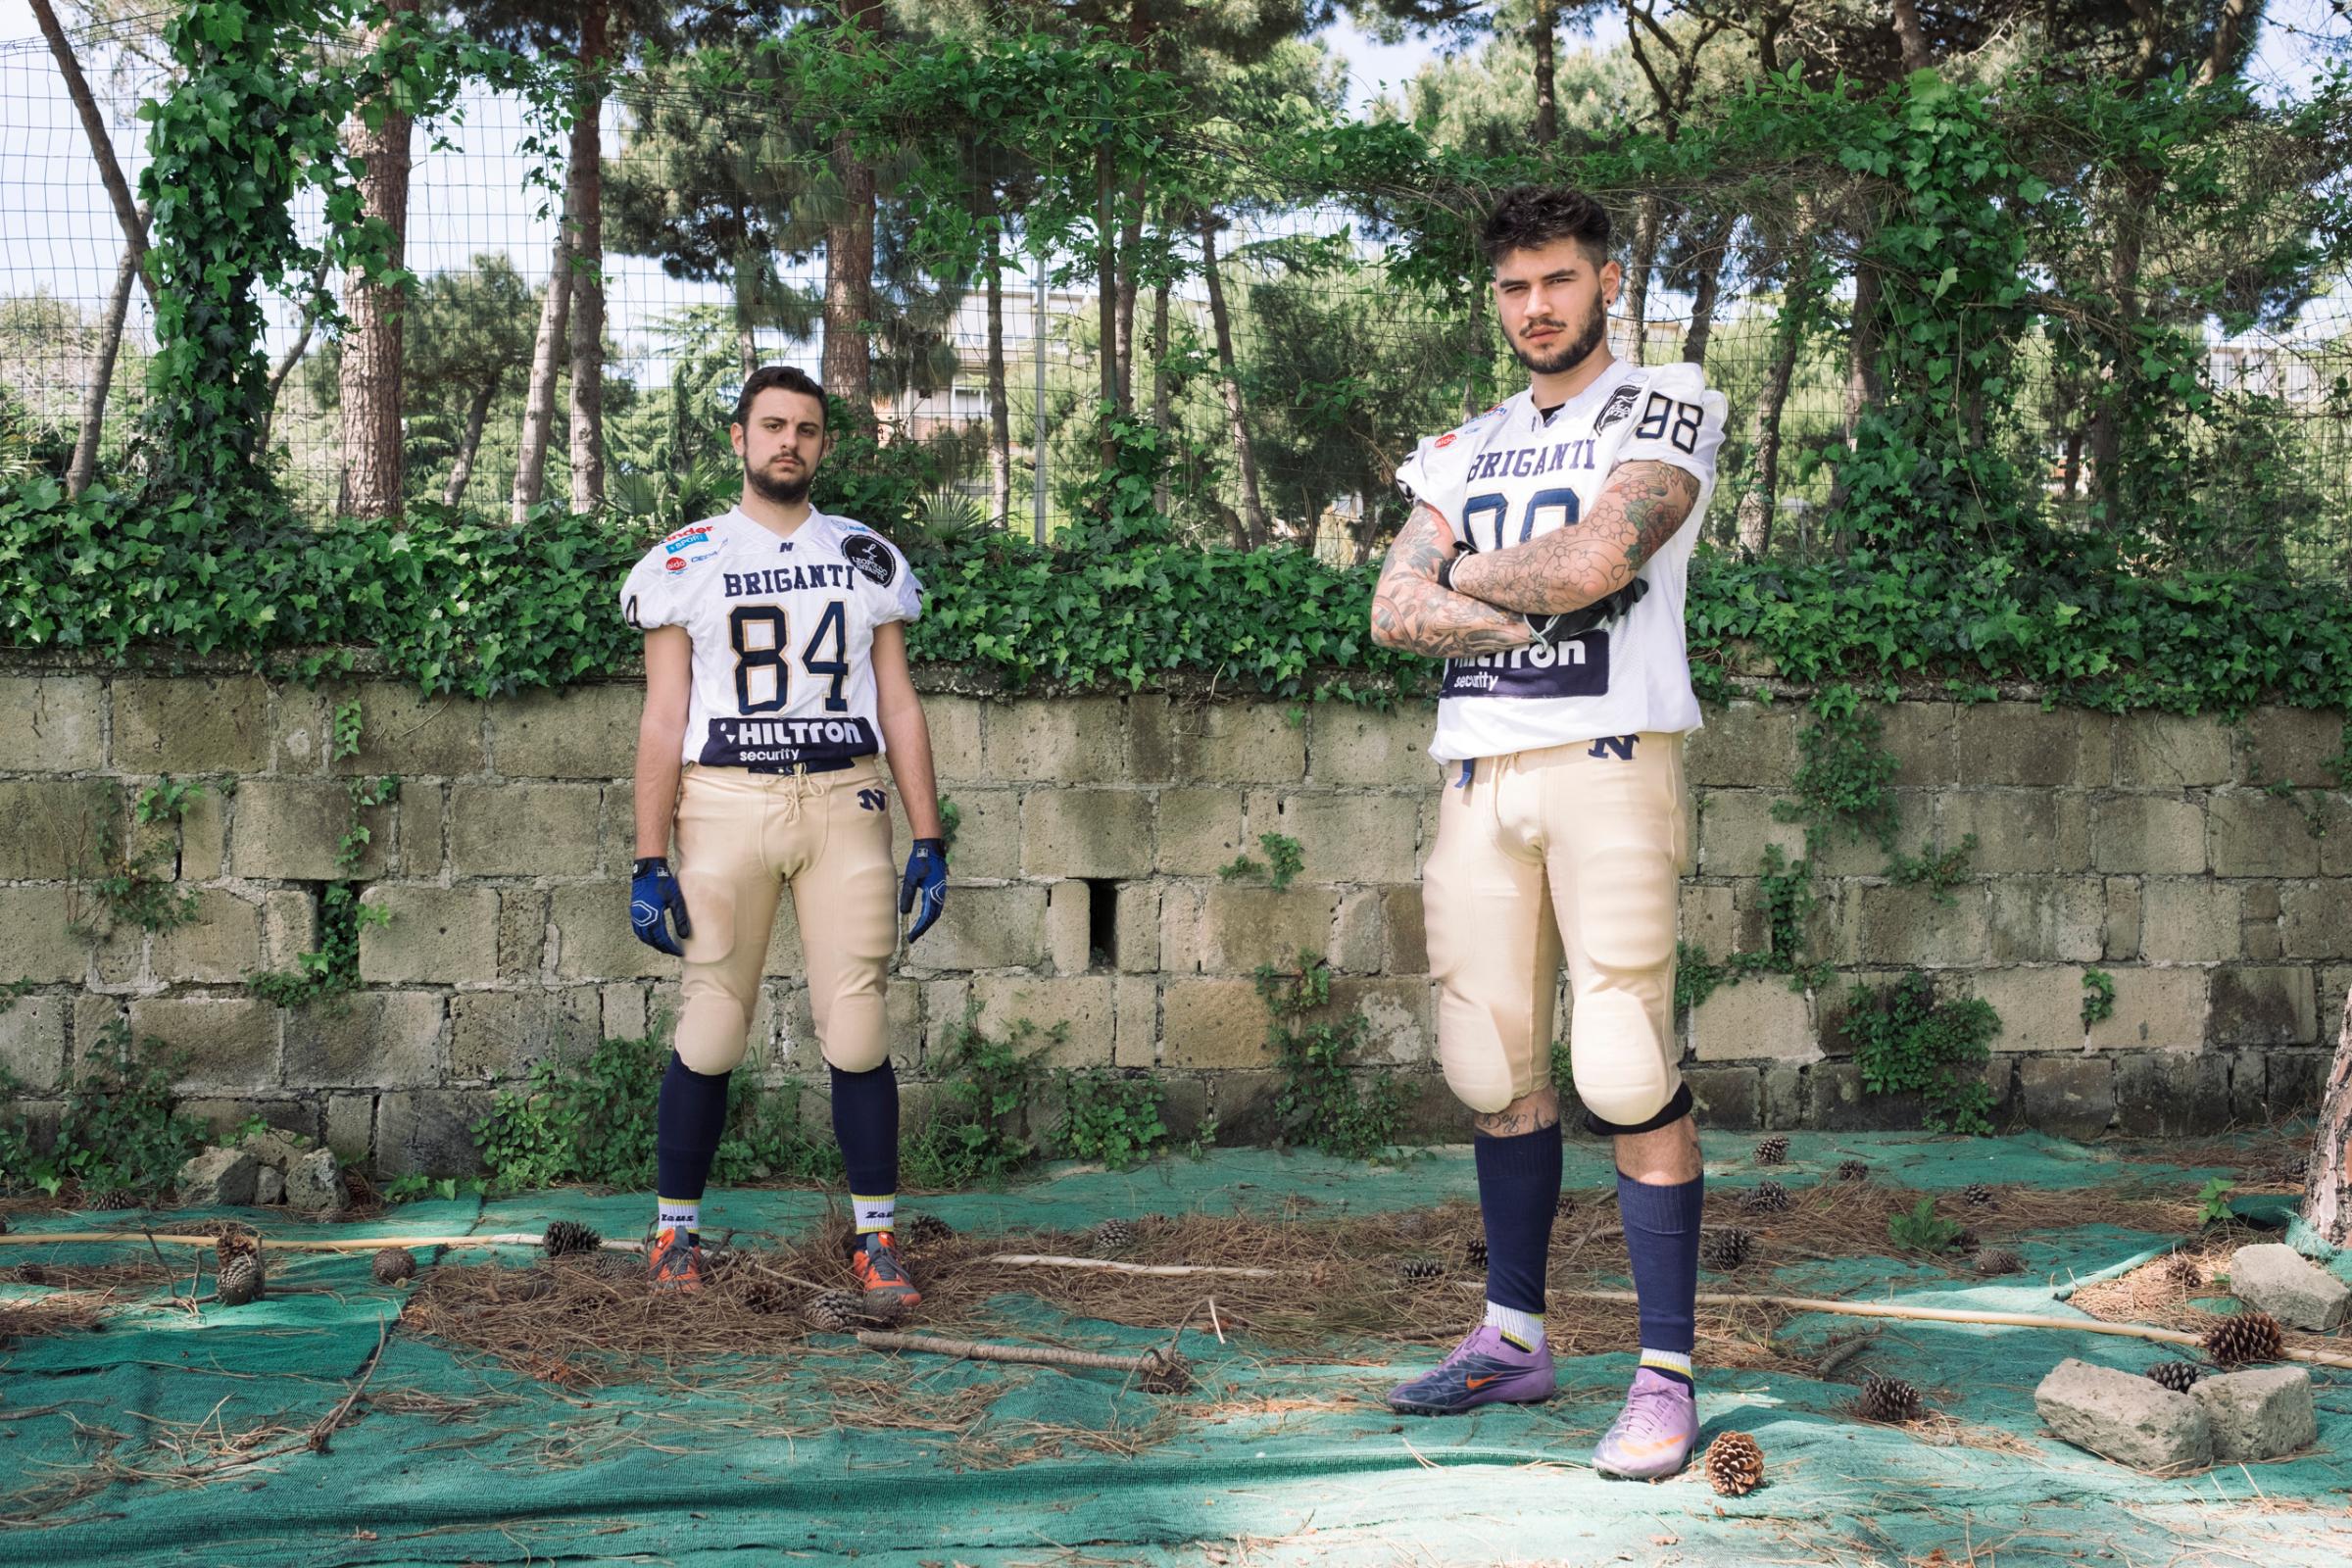 Players of the Briganti Napoli American Footbal Team before playing a regular season game, April, 2016. Briganti, or brigands, was the name associated with the people that fought against the Piedimontese soldiers during and after the unification of Italy.